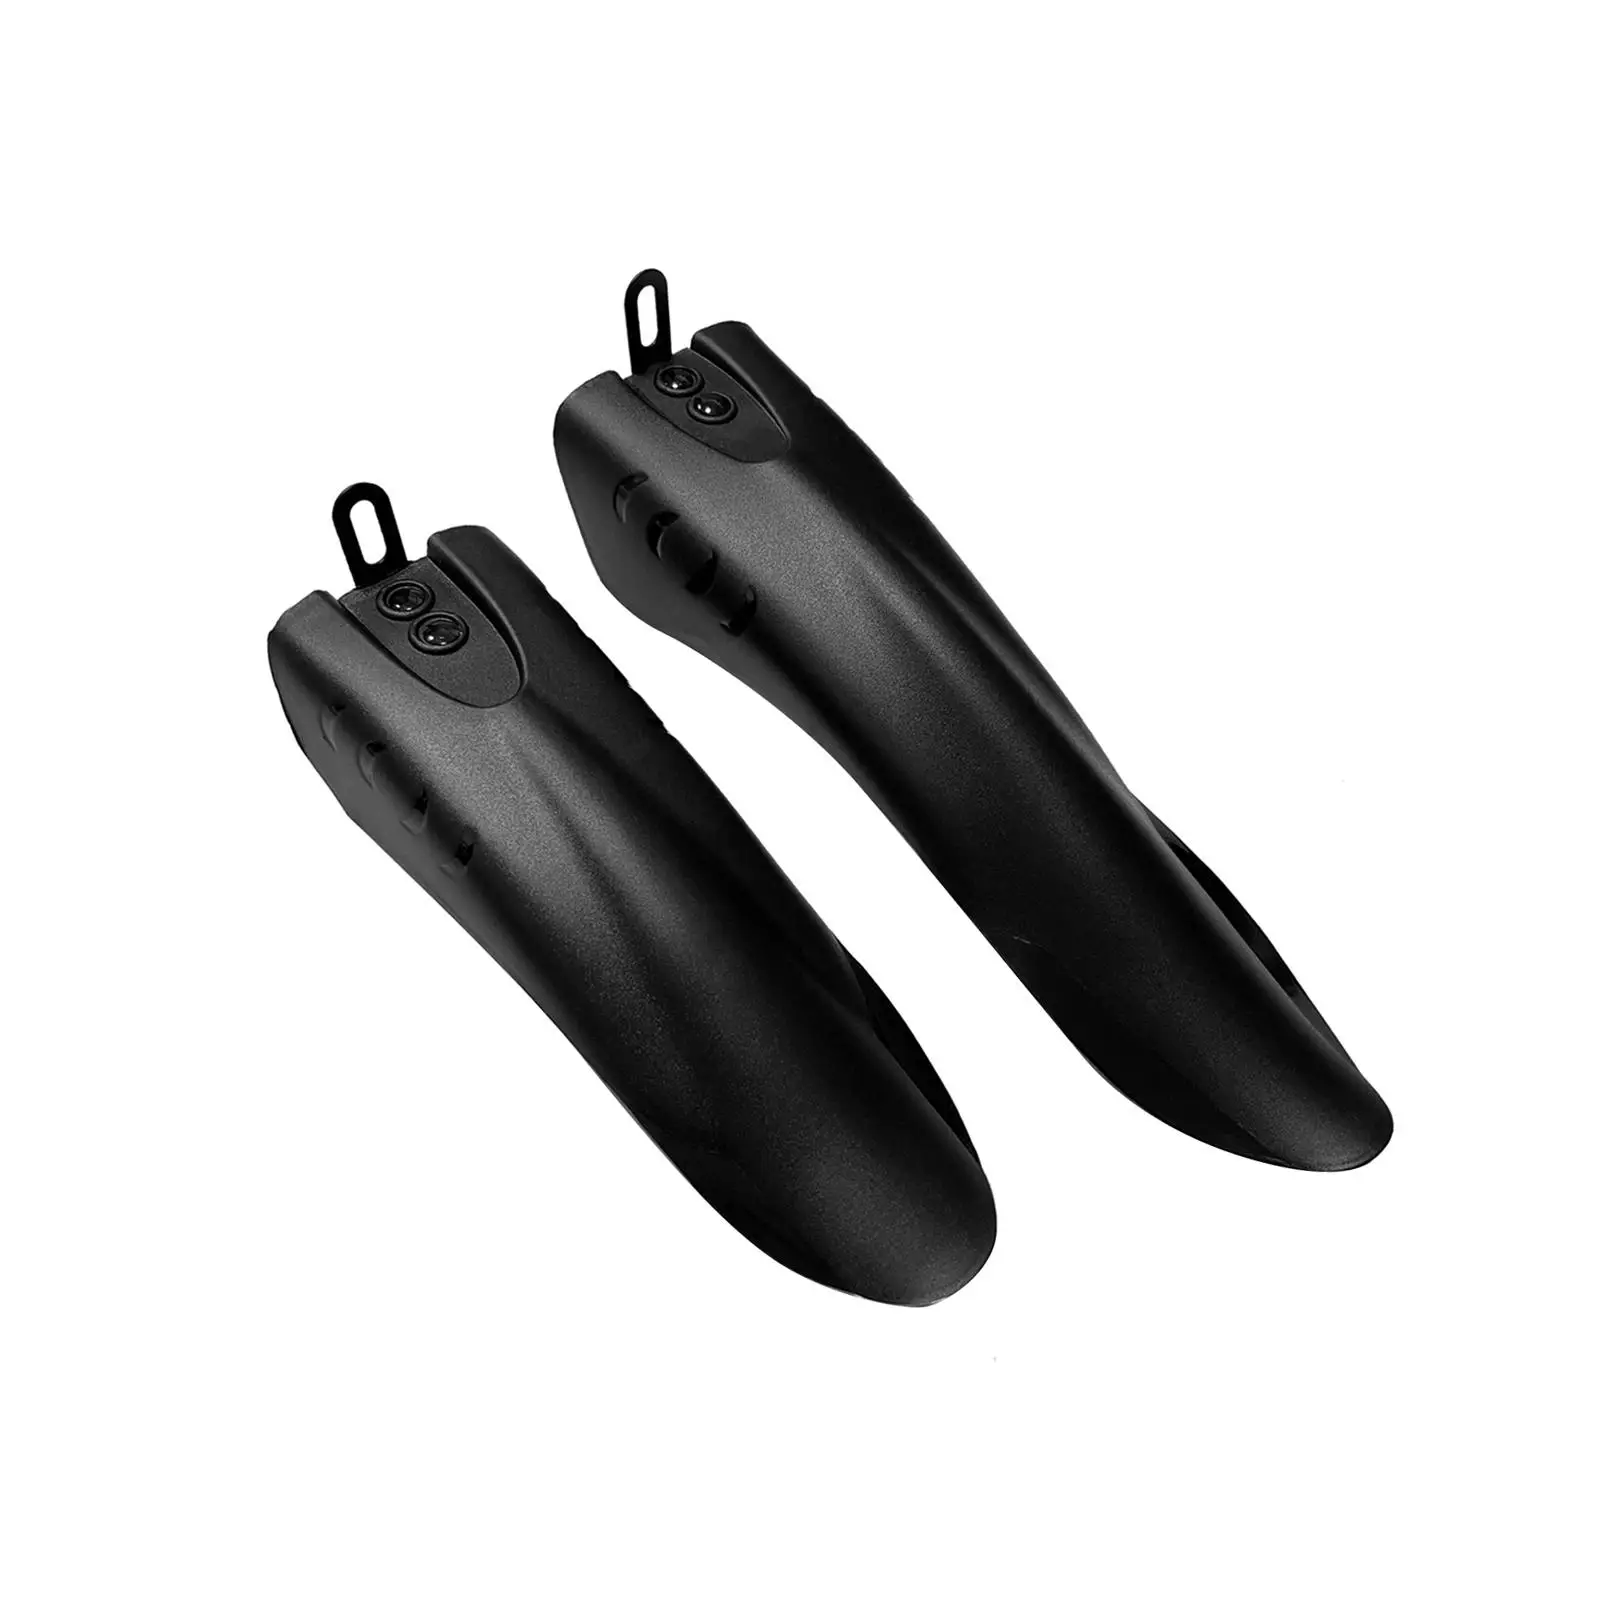 Bike Mudguard Front Rear Set Supplies Lightweight Accs Spare Parts Practical Mudflap for Sports Mountain Bike Outdoor